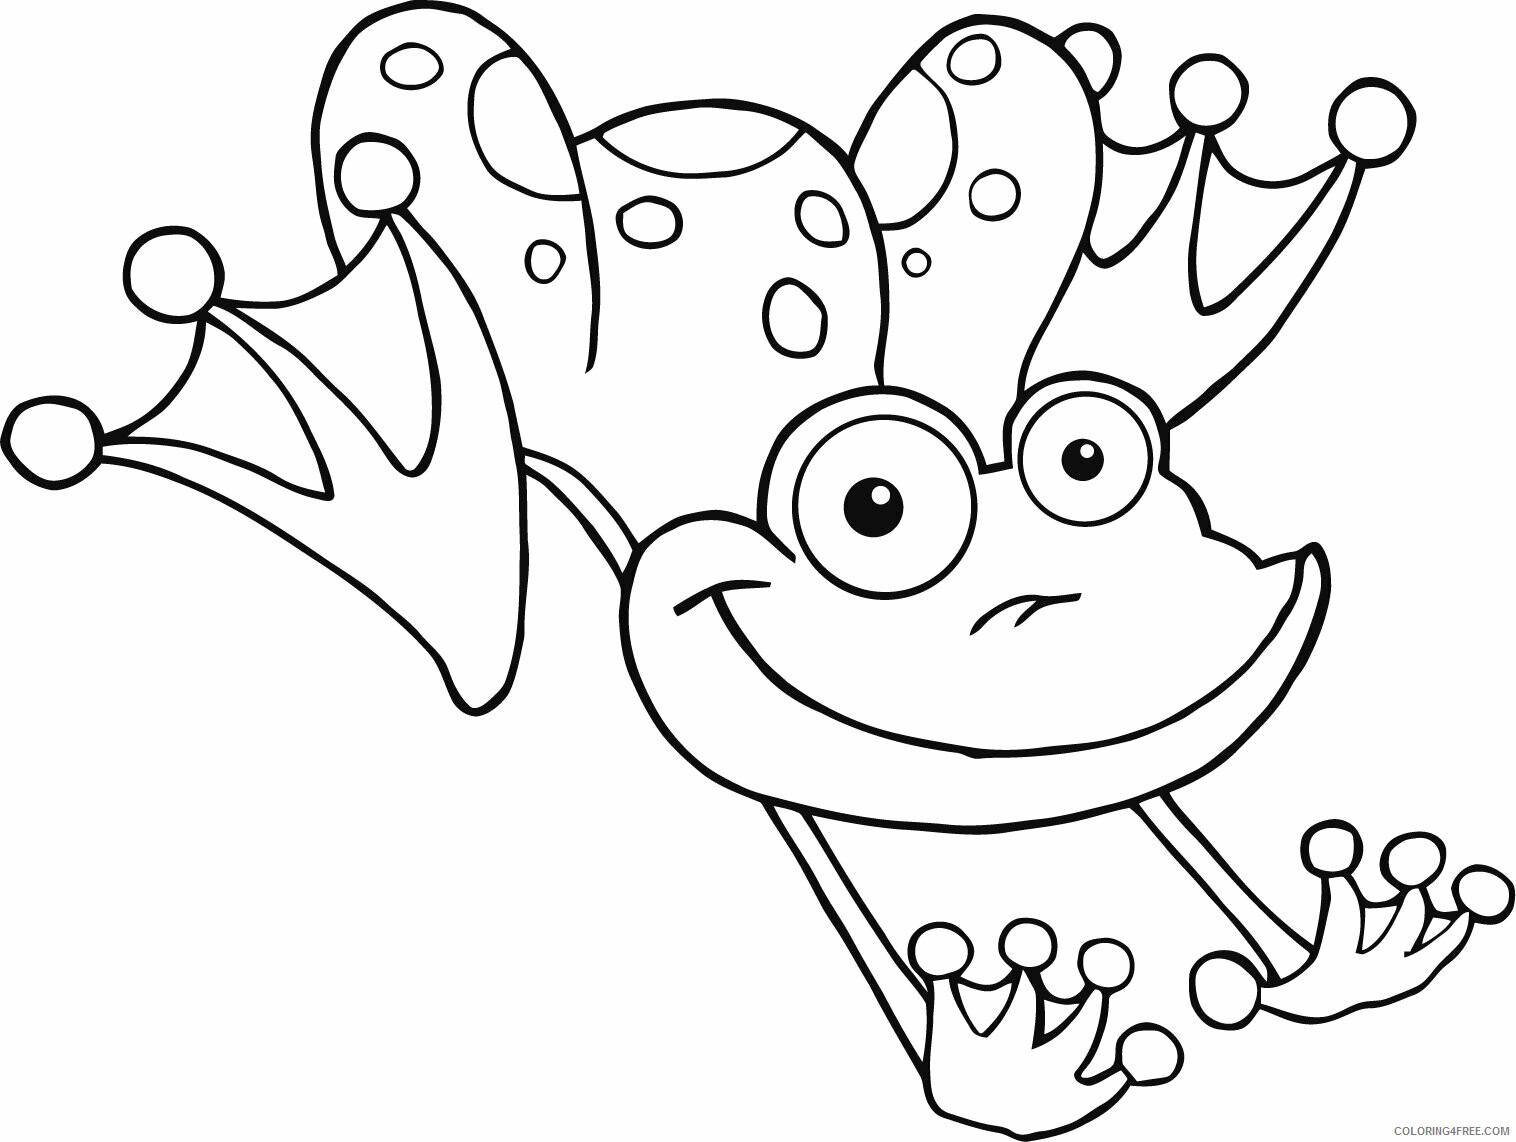 Frog Coloring Pages Animal Printable Sheets frog drawing for kids 15 2021 2254 Coloring4free